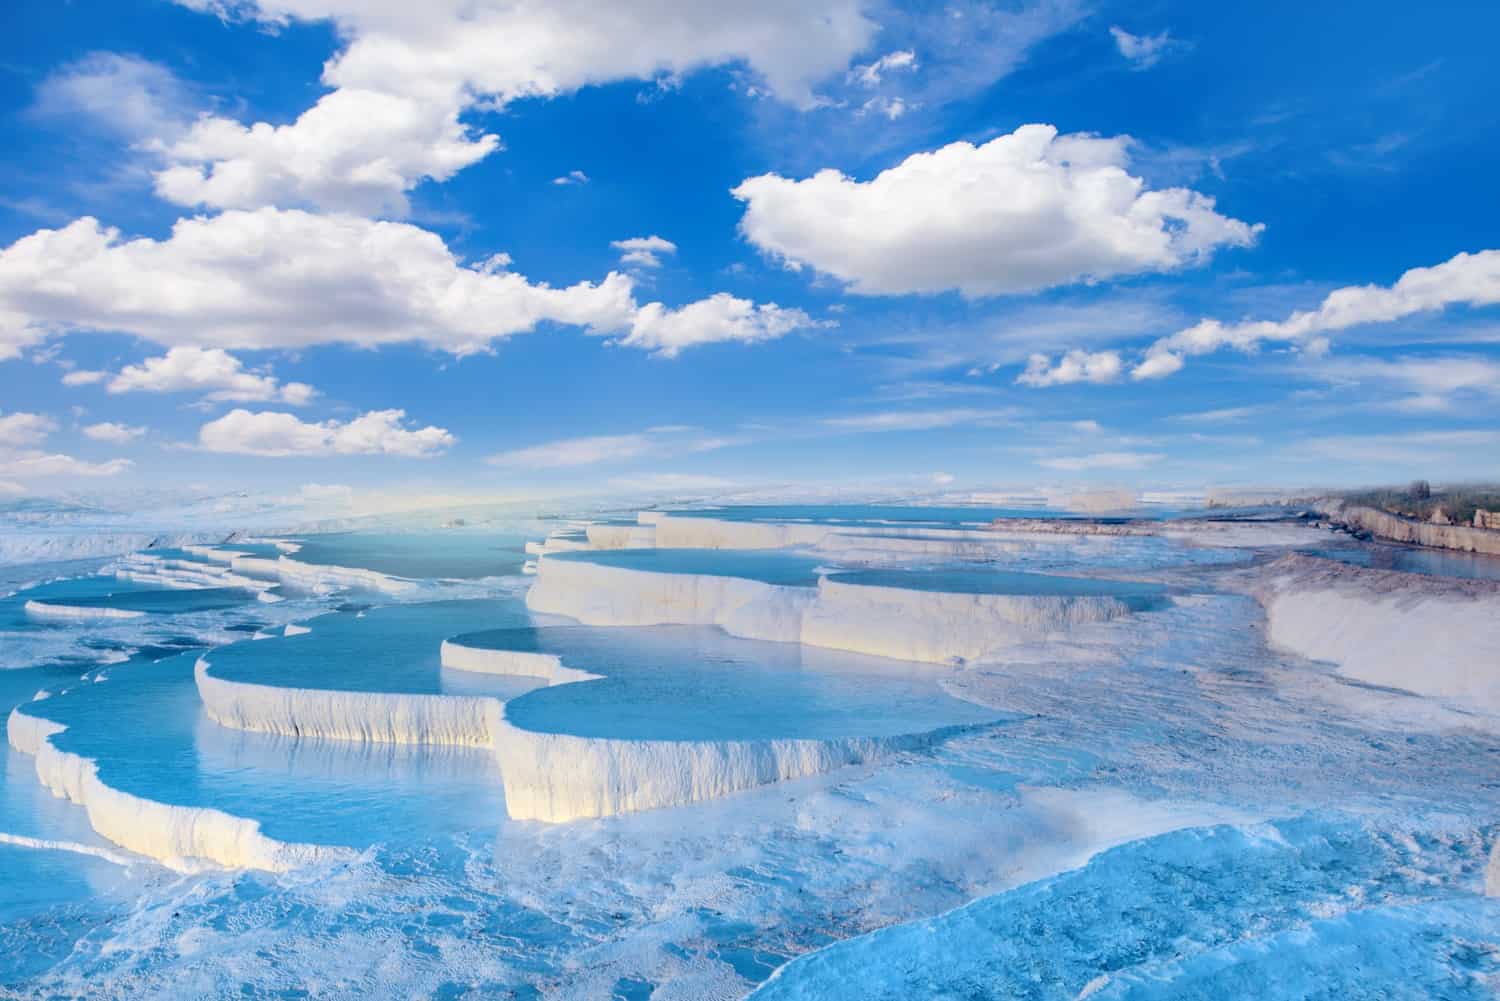 Pamukkale travertines (stepped layers of white limestone rock), each covered in a shallow layer of water with blue sky and white clouds overhead.